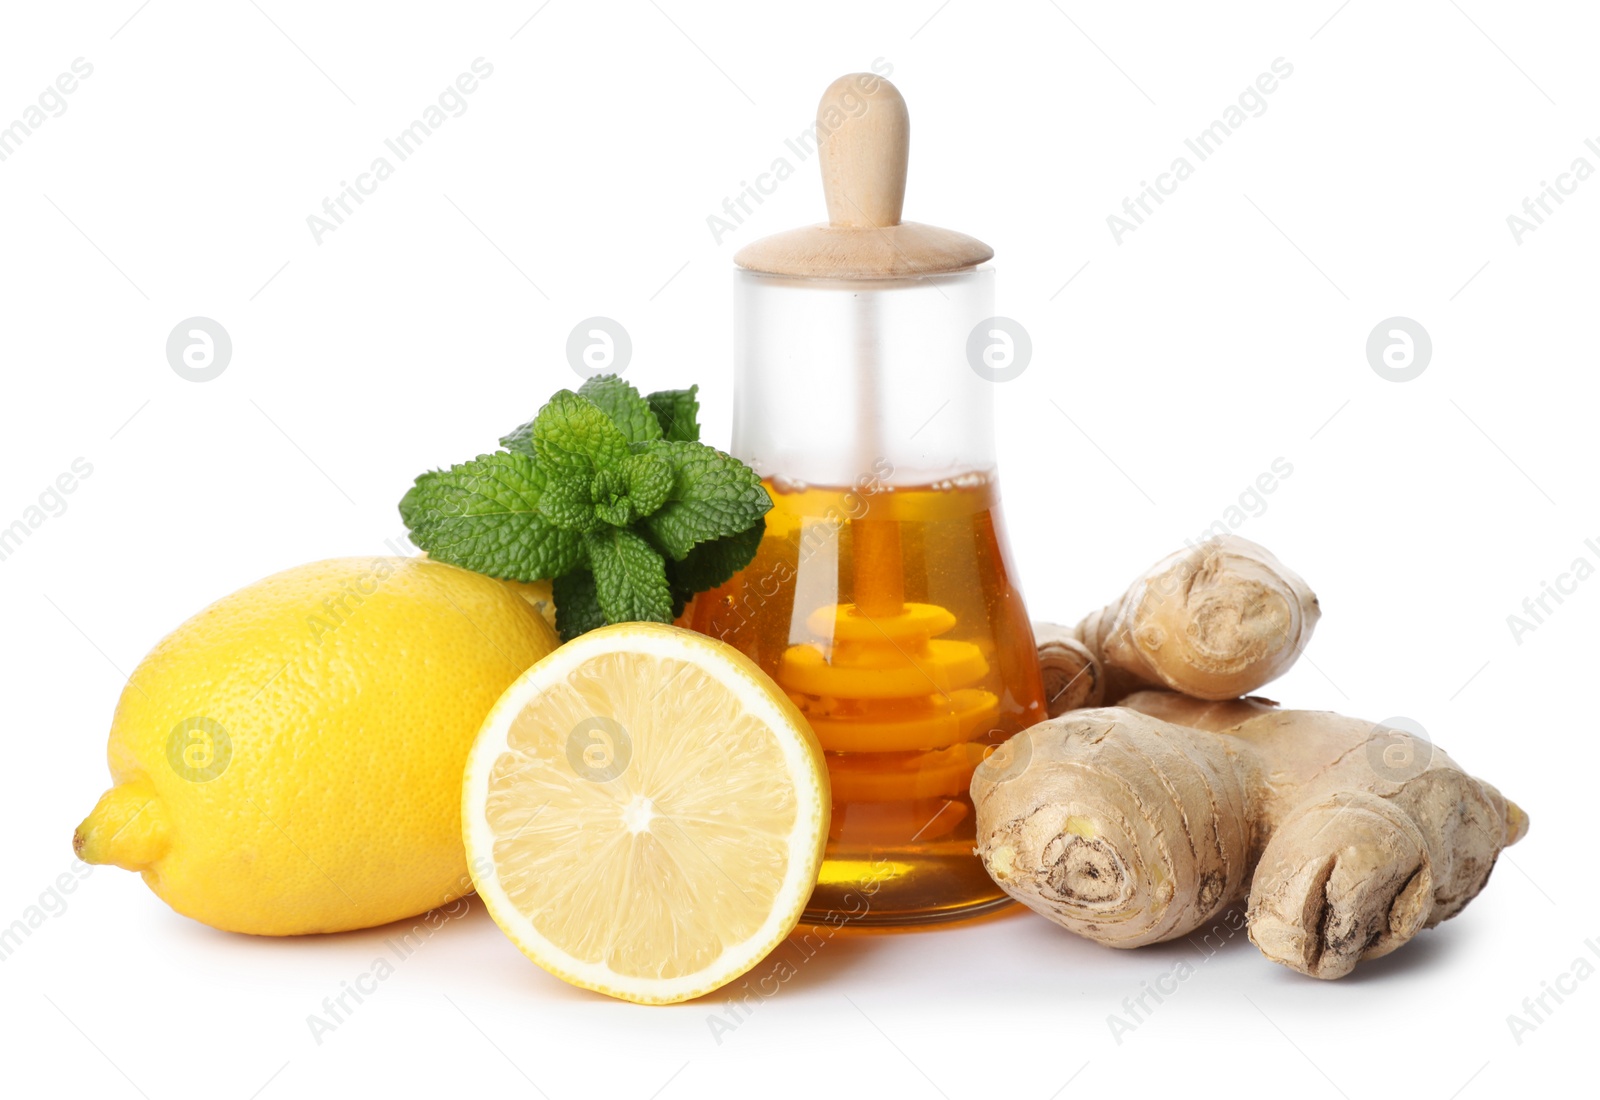 Photo of Jar of honey, ginger, mint and lemons on white background. Cough remedies